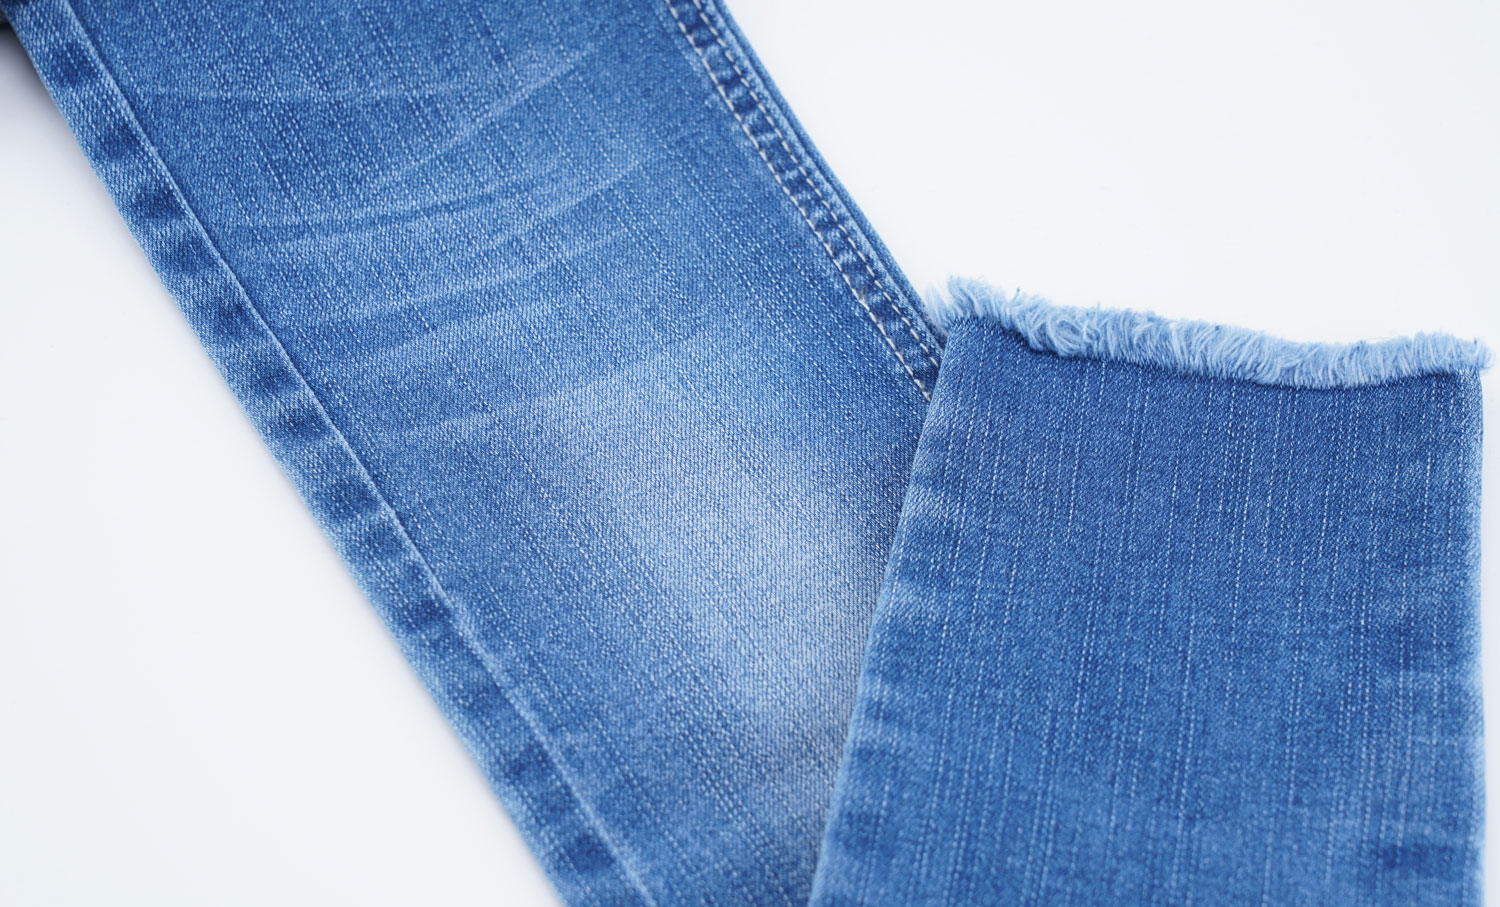 5 Reasons a Jeans Fabric Material Is Good for You 1